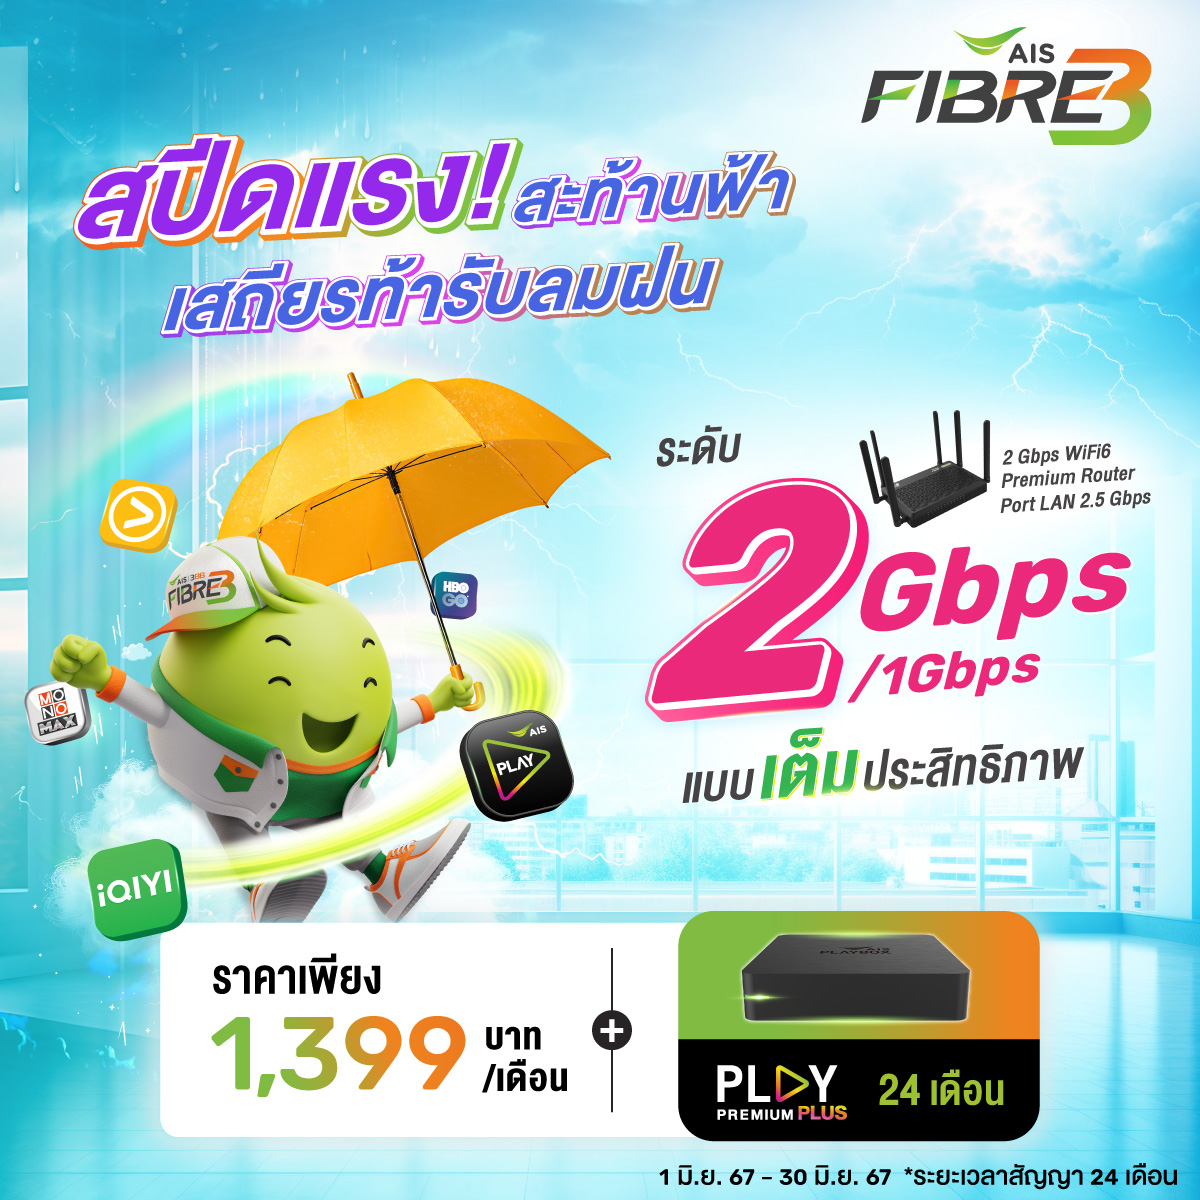 AISFIBRE3 2Gbps JUNE Time1717322075100